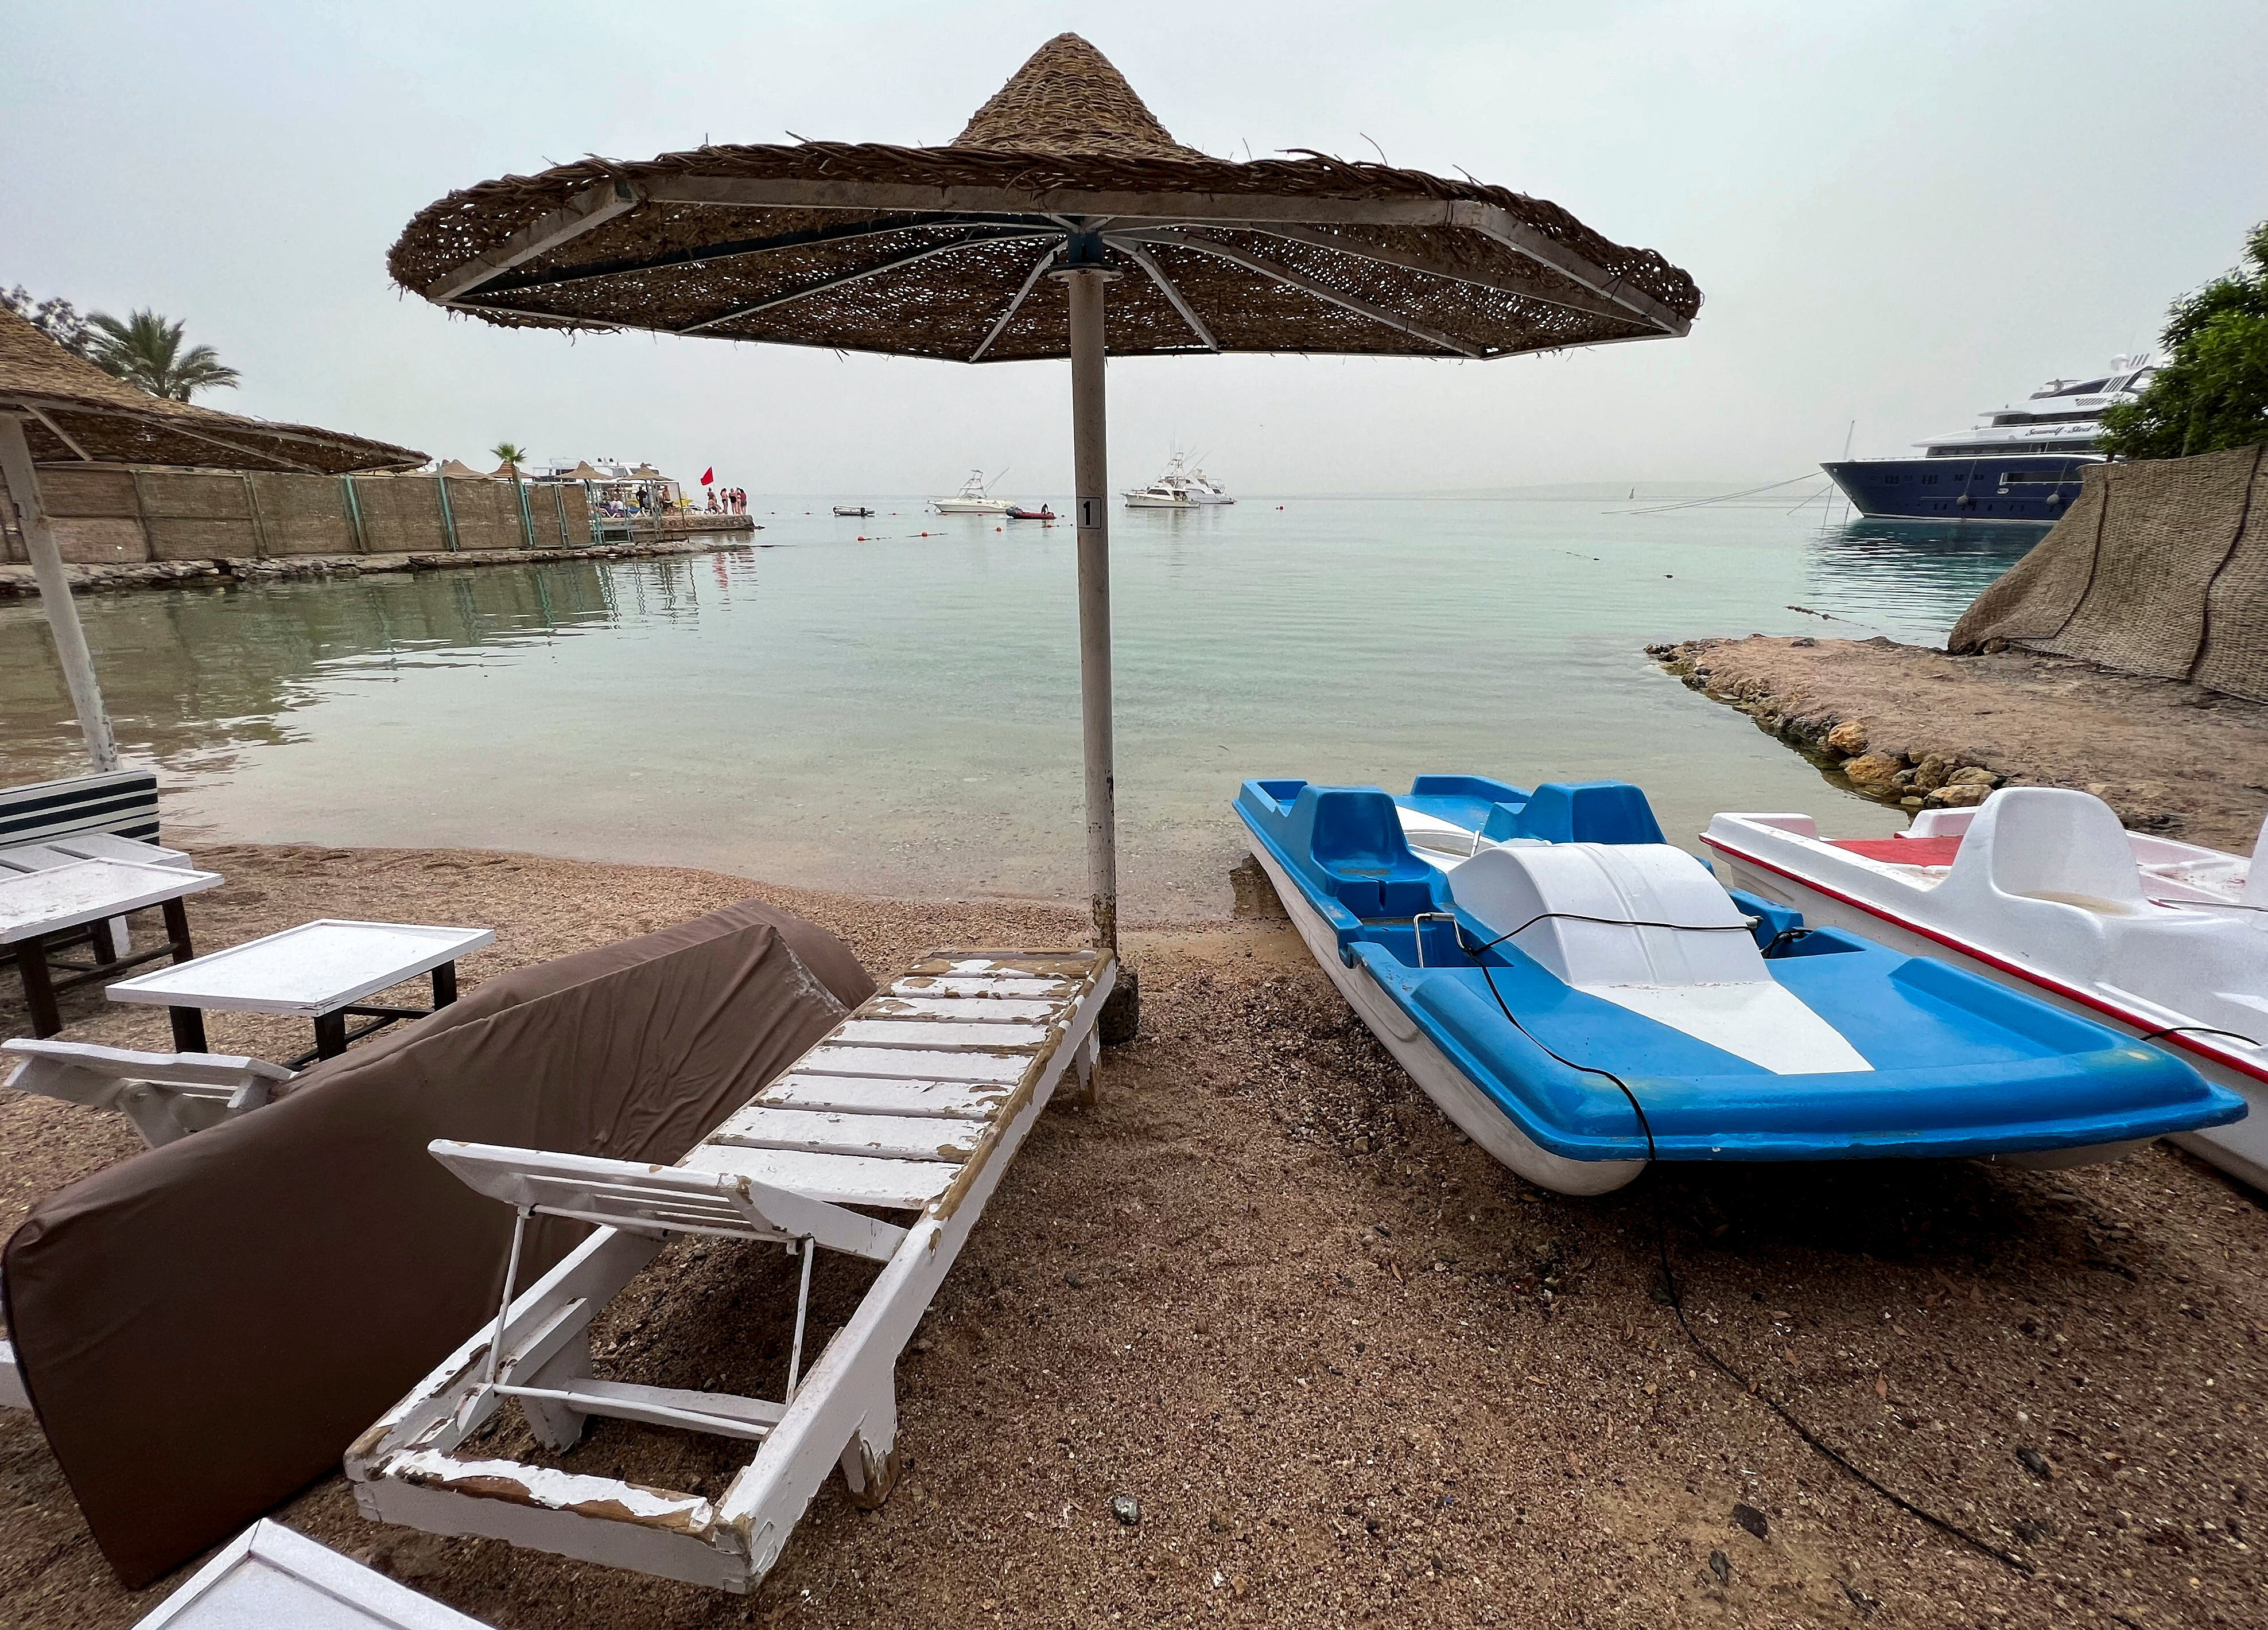 a view of one of the beaches that have been closed after a russian citizen was killed in a shark attack near a beach at the egyptian red sea resort of hurghada egypt june 9 2023 photo reuters